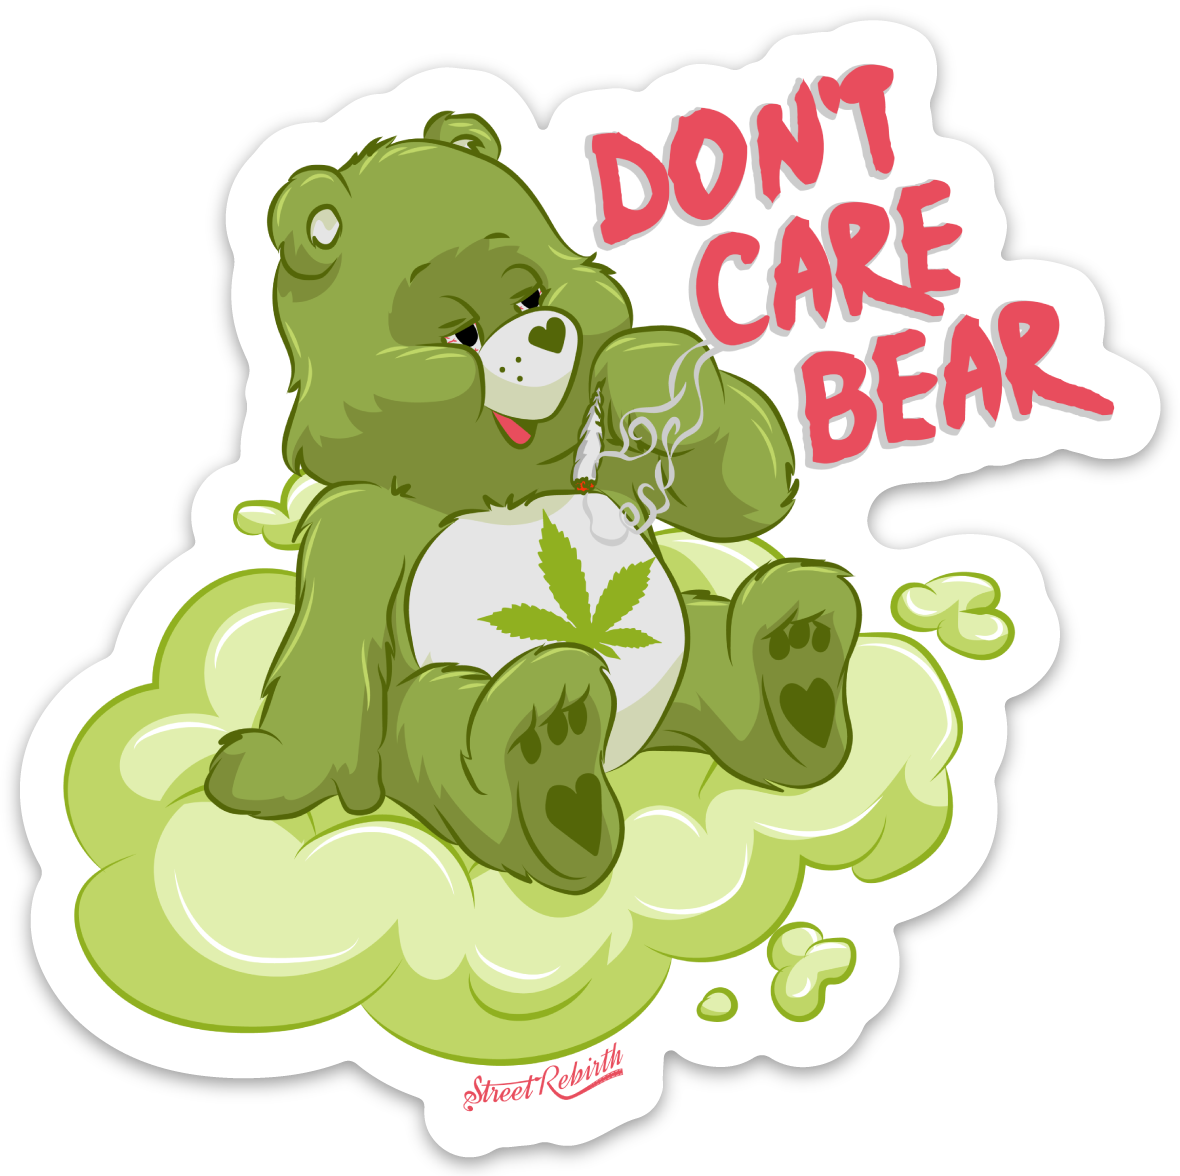 Don't Care Bear PUN STICKER – ONE 4 INCH WATER PROOF VINYL STICKER – FOR HYDRO FLASK, SKATEBOARD, LAPTOP, PLANNER, CAR, COLLECTING, GIFTING